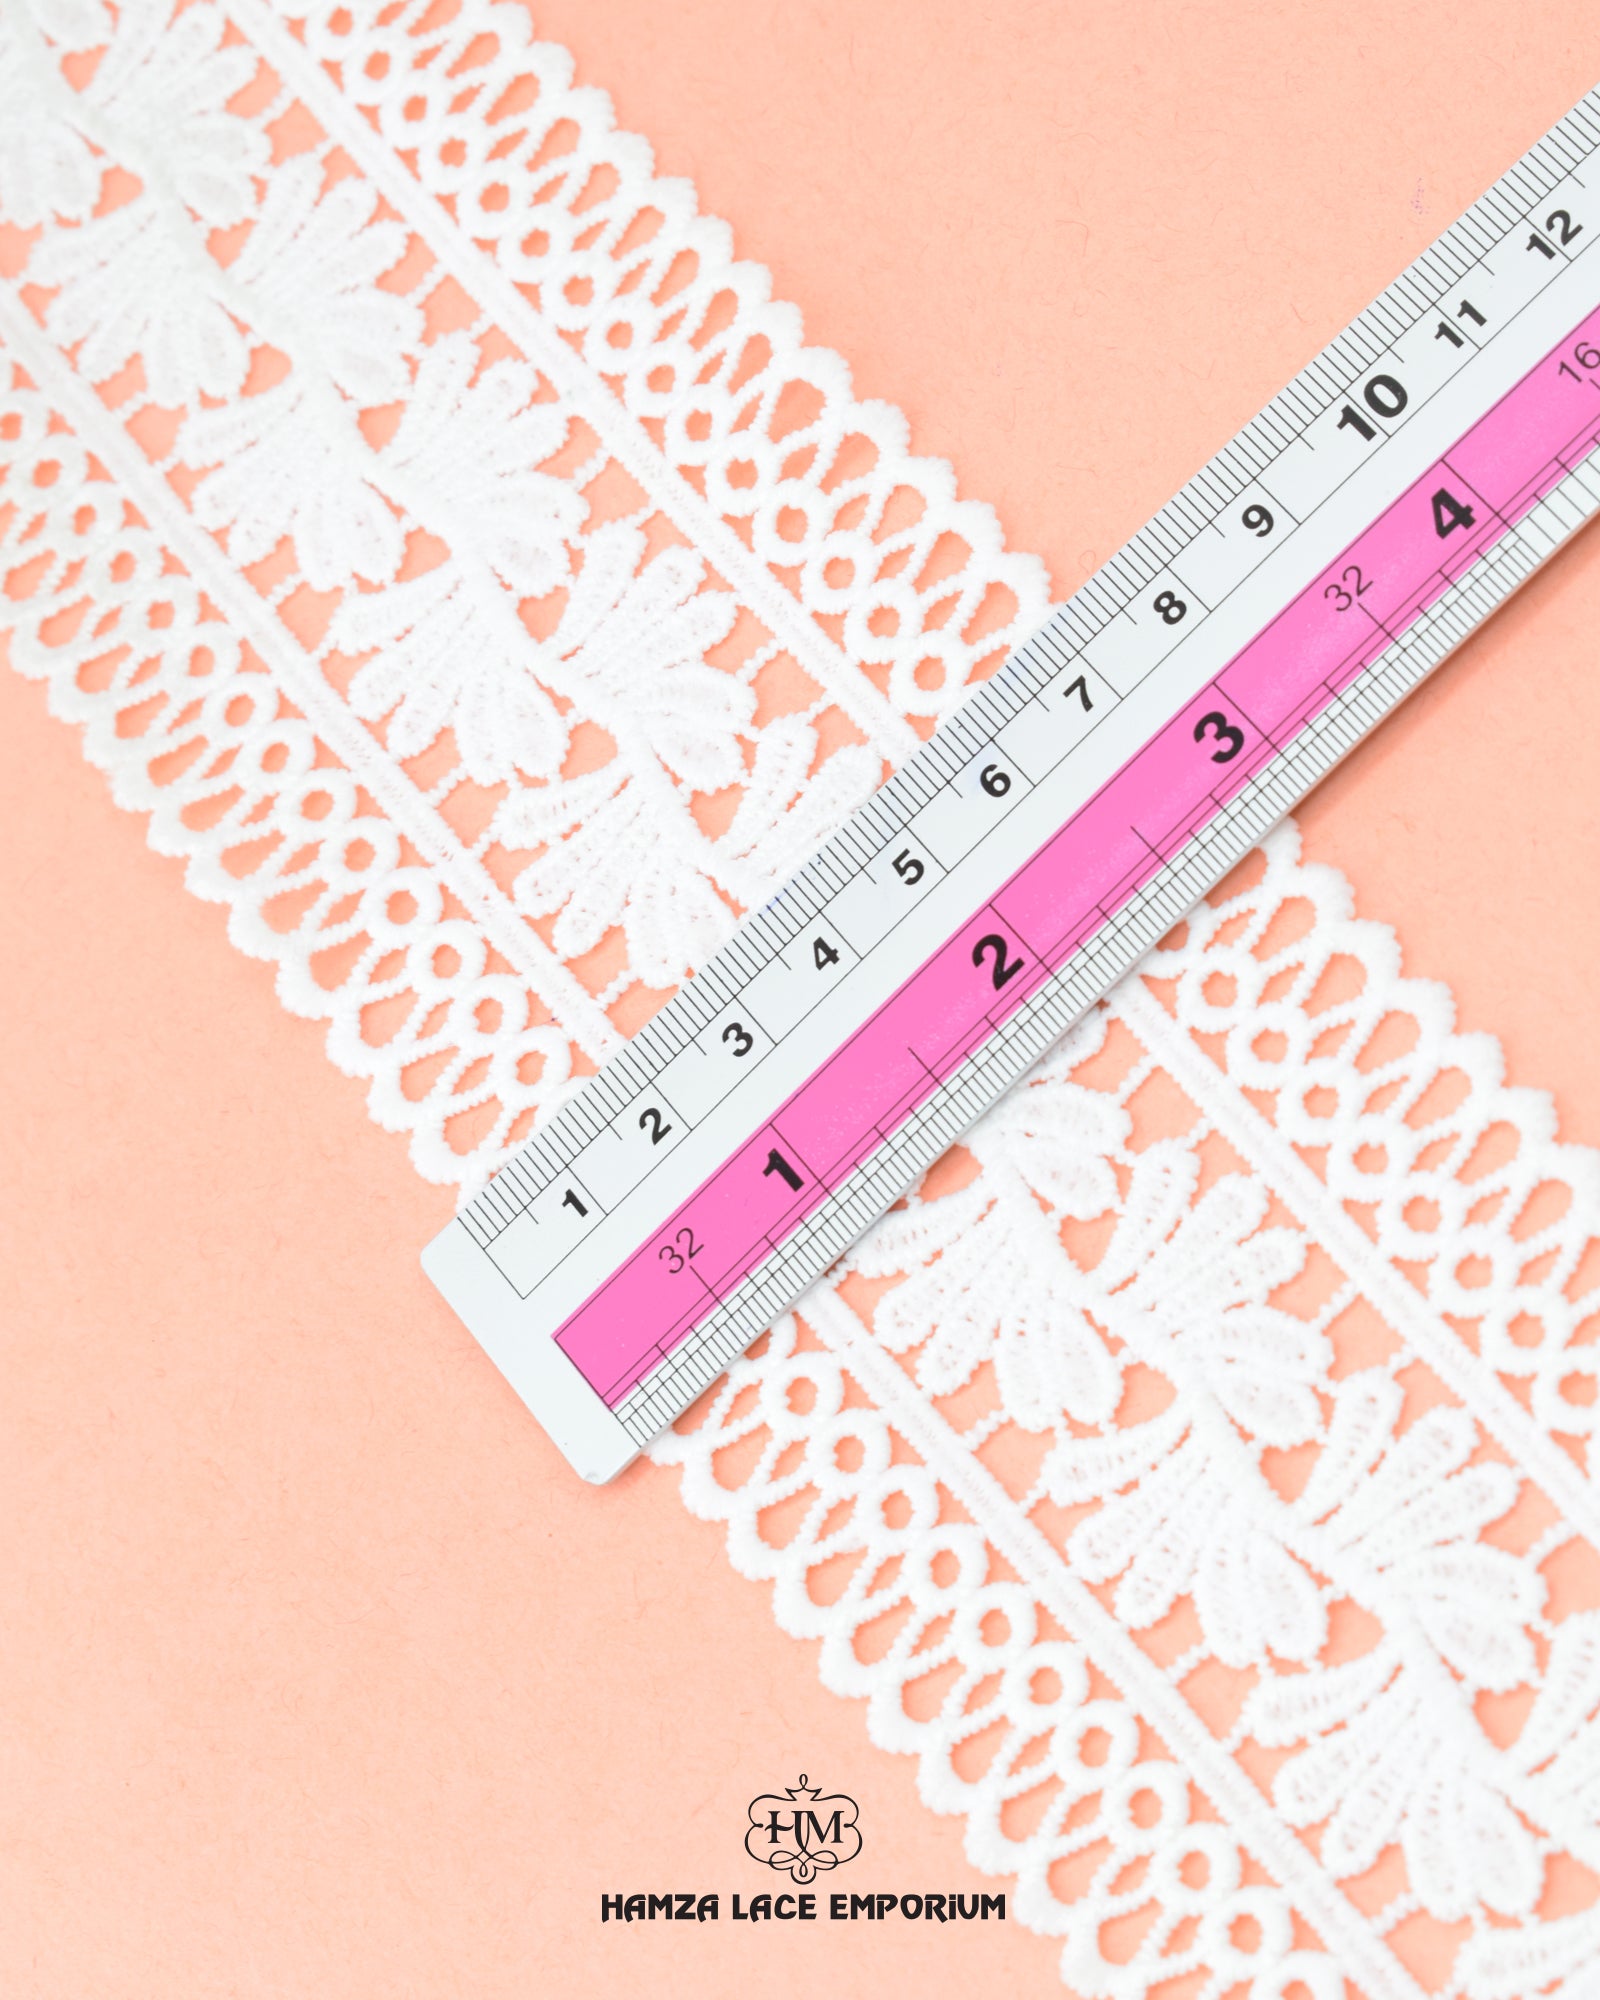 Size of the 'Center Filling Lace 23294' is shown with the help of a ruler as '3' inches